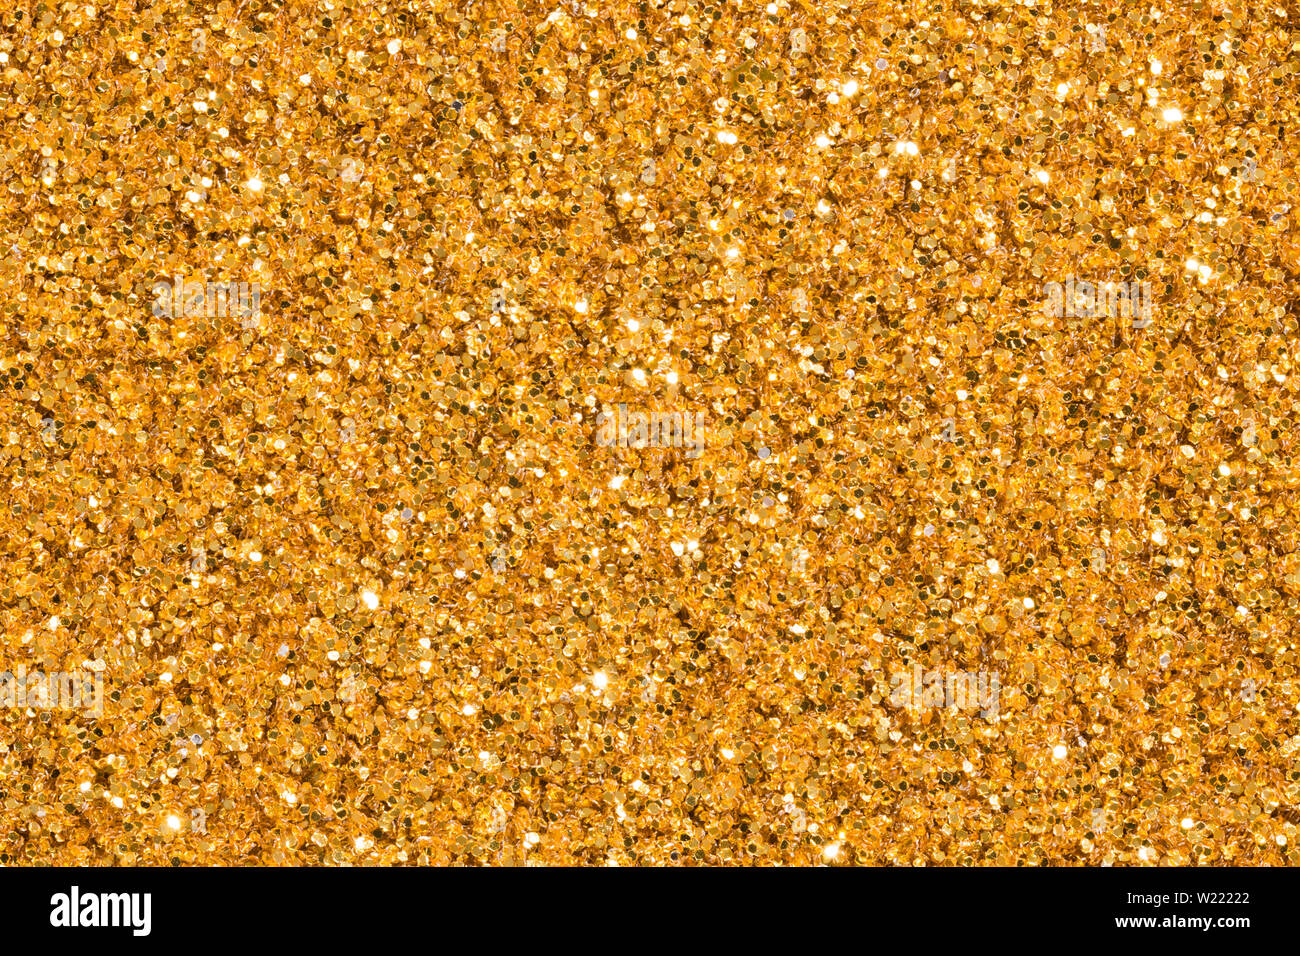 Light golden background with contrast. High quality texture in extremely high resolution. Stock Photo